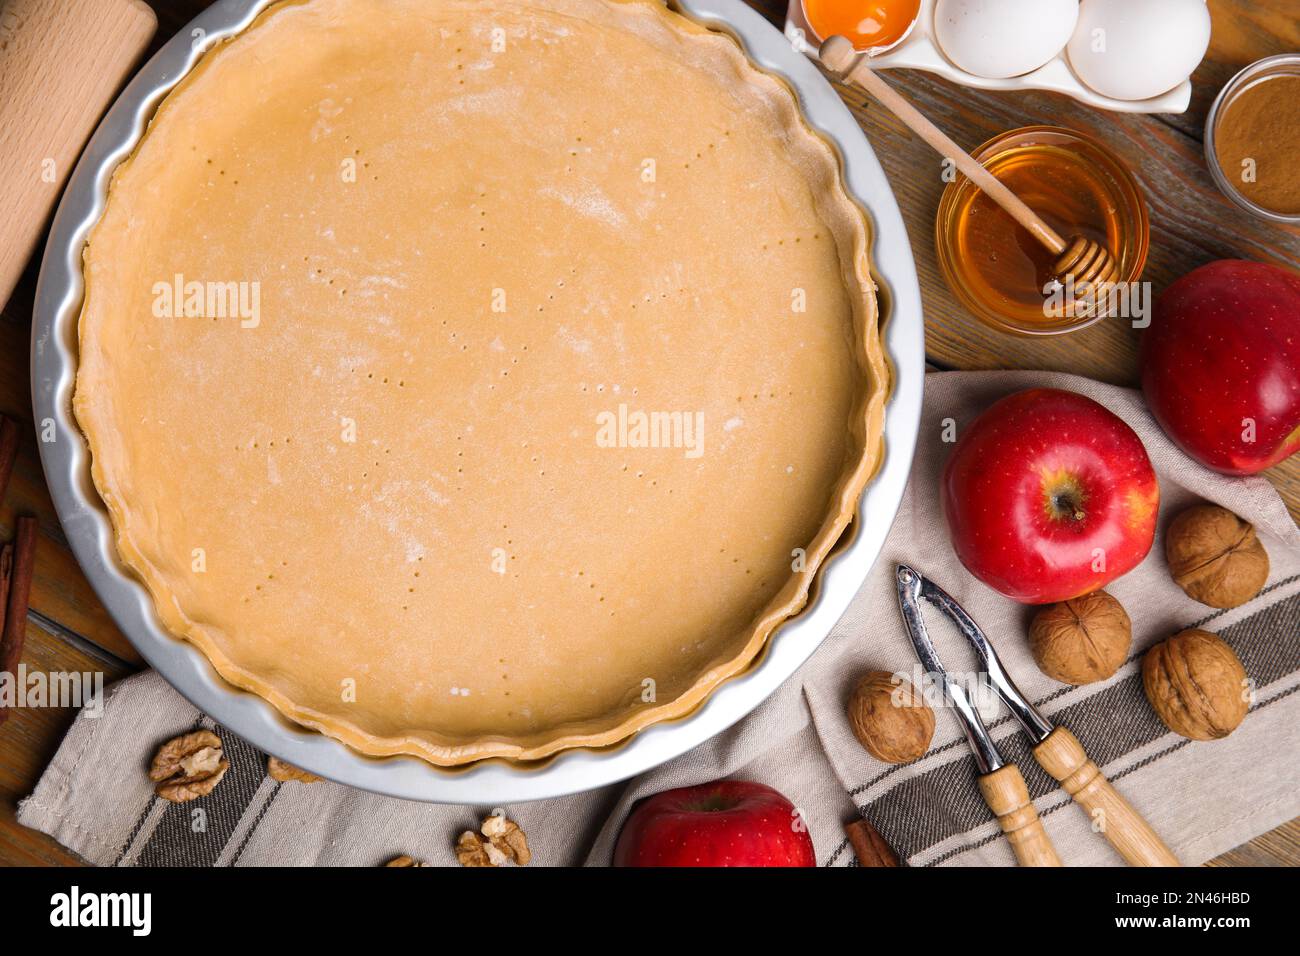 Raw dough and ingredients for traditional English apple pie on wooden table, flat lay Stock Photo